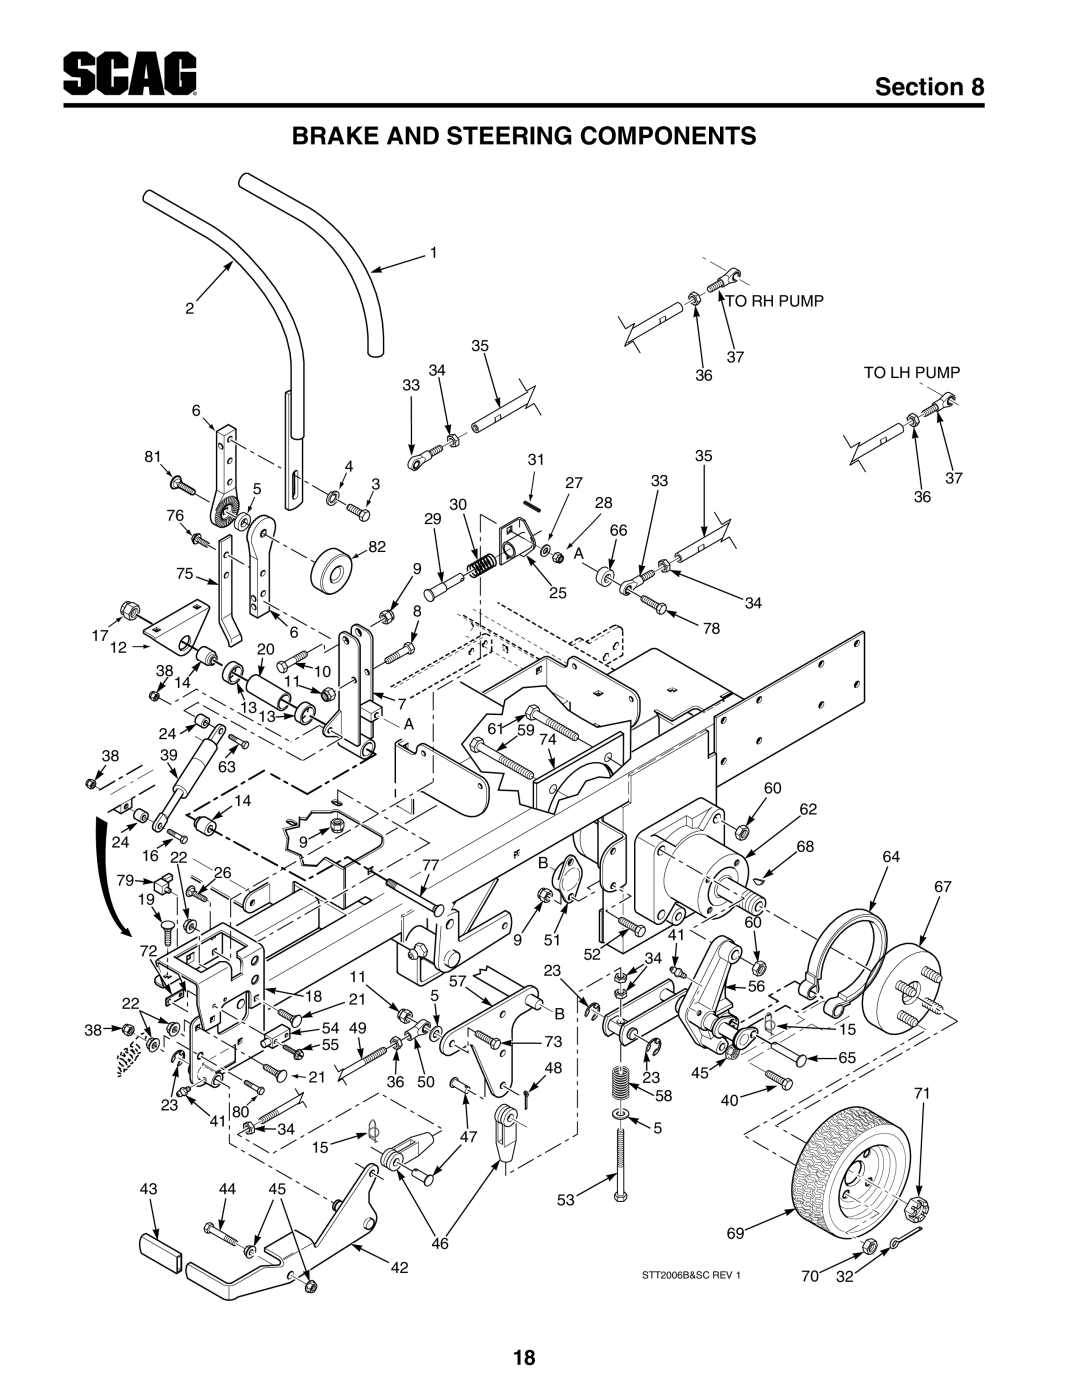 Scag Power Equipment STT-25CH-LP manual Brake And Steering Components, Section 